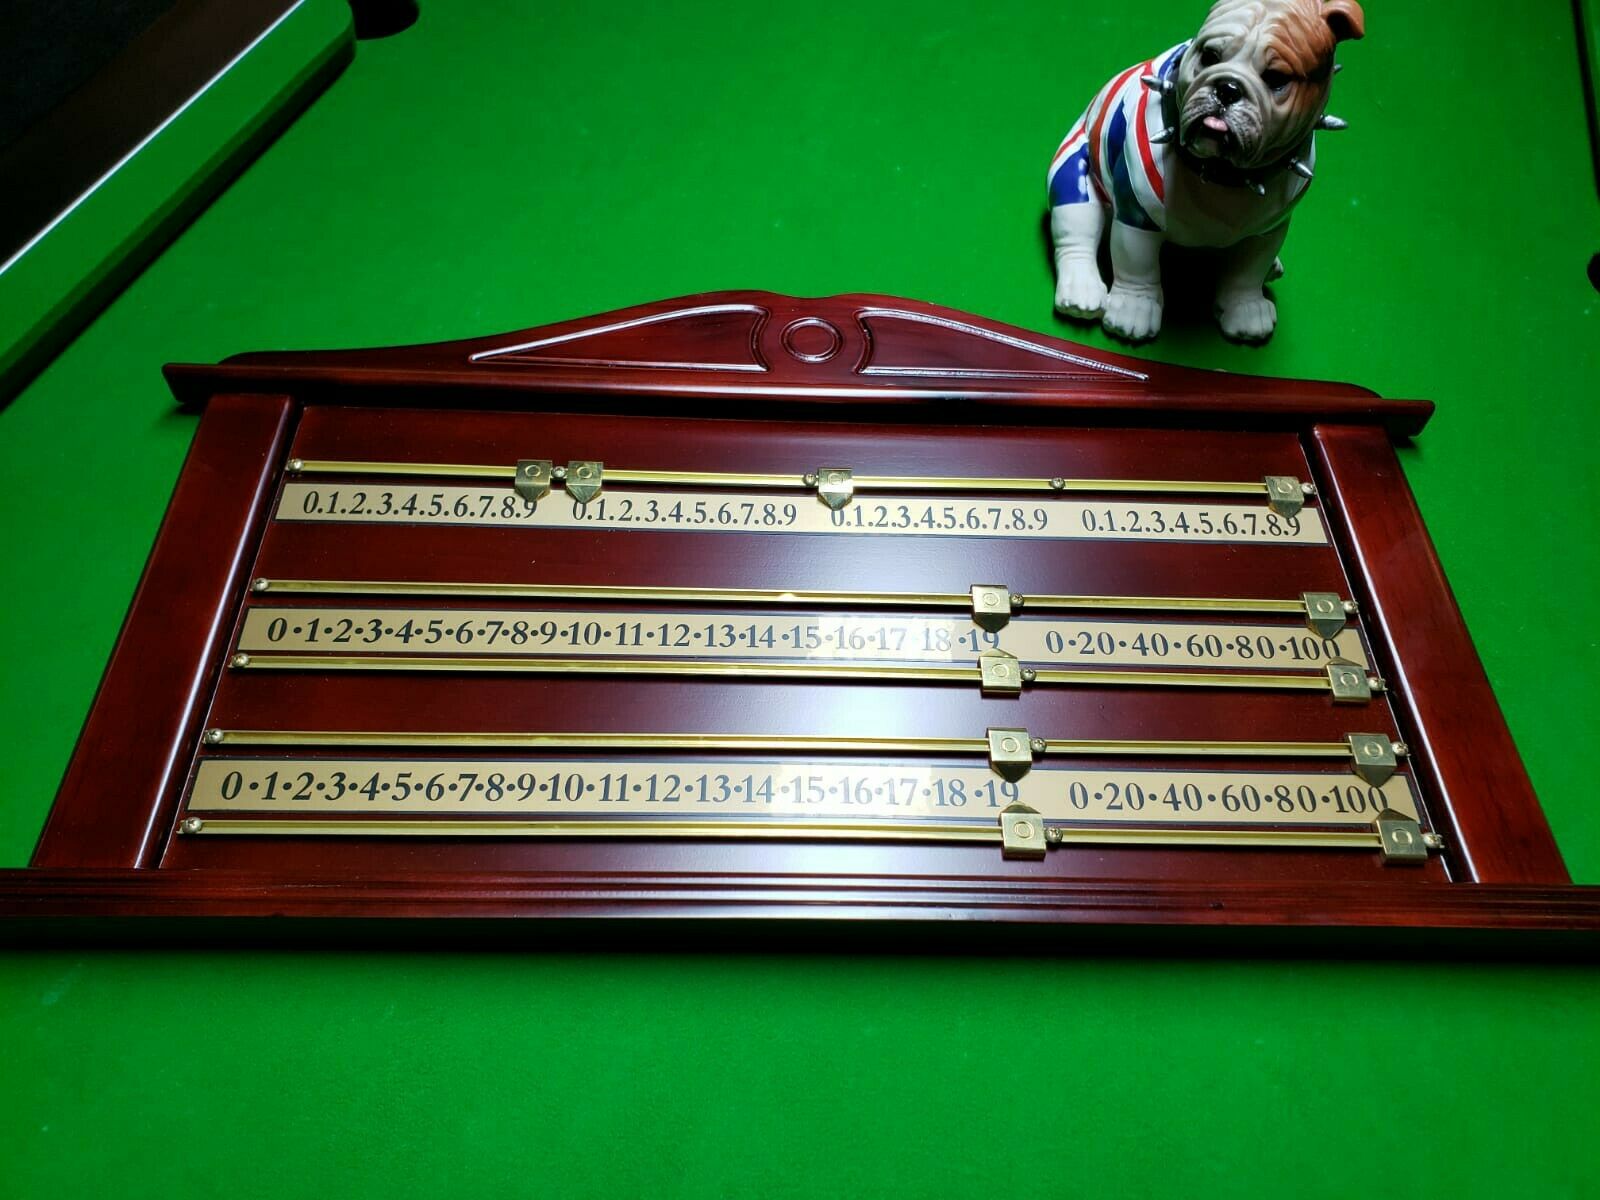 Top quality snooker scoreboard for 4 players, mahogany finish, brass rails/pointers